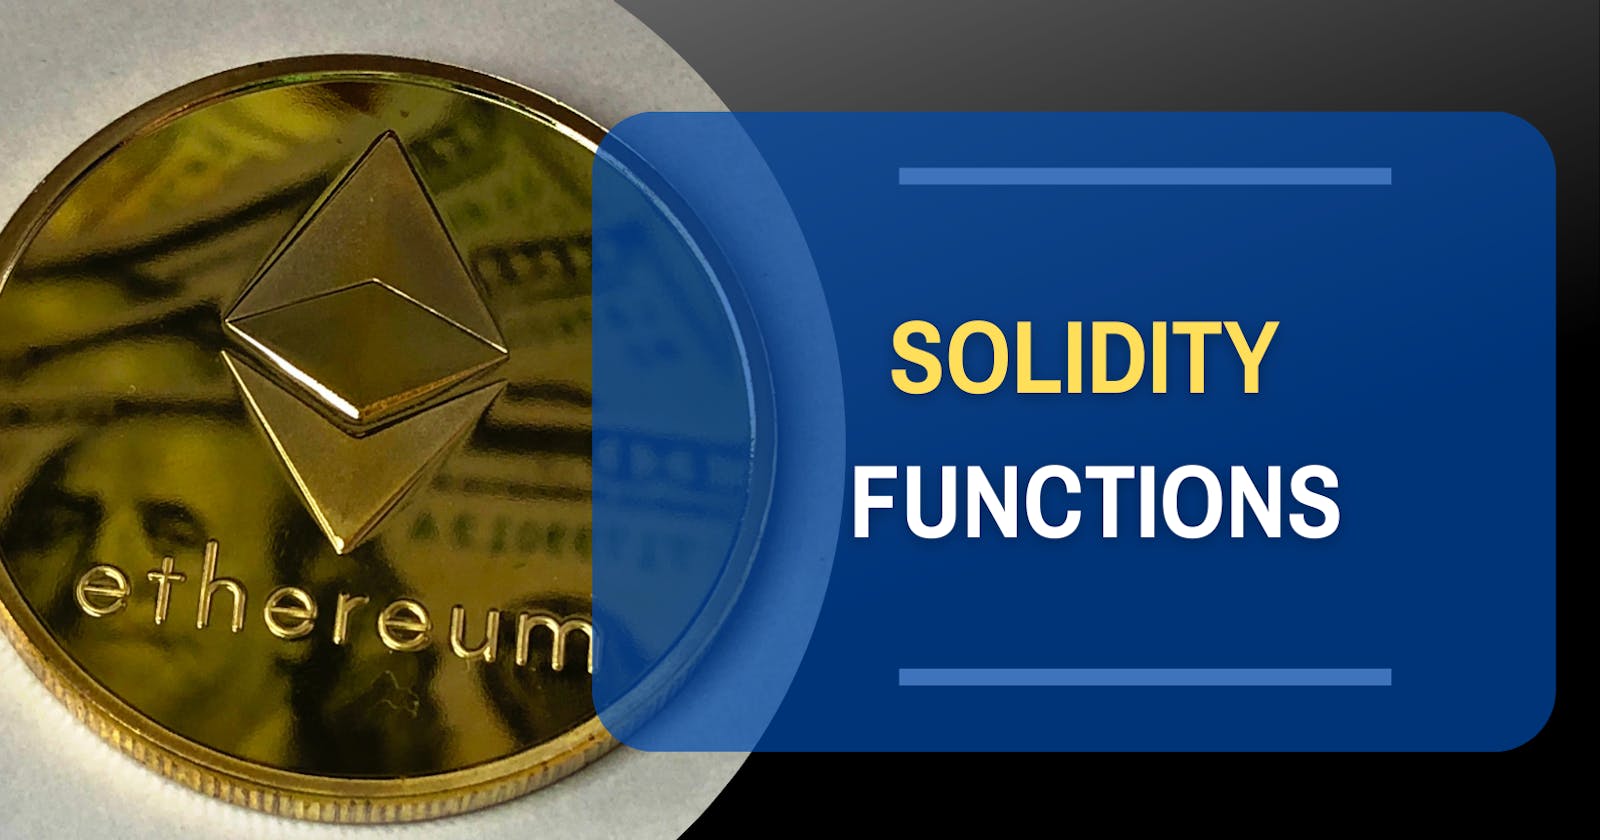 Solidity Functions